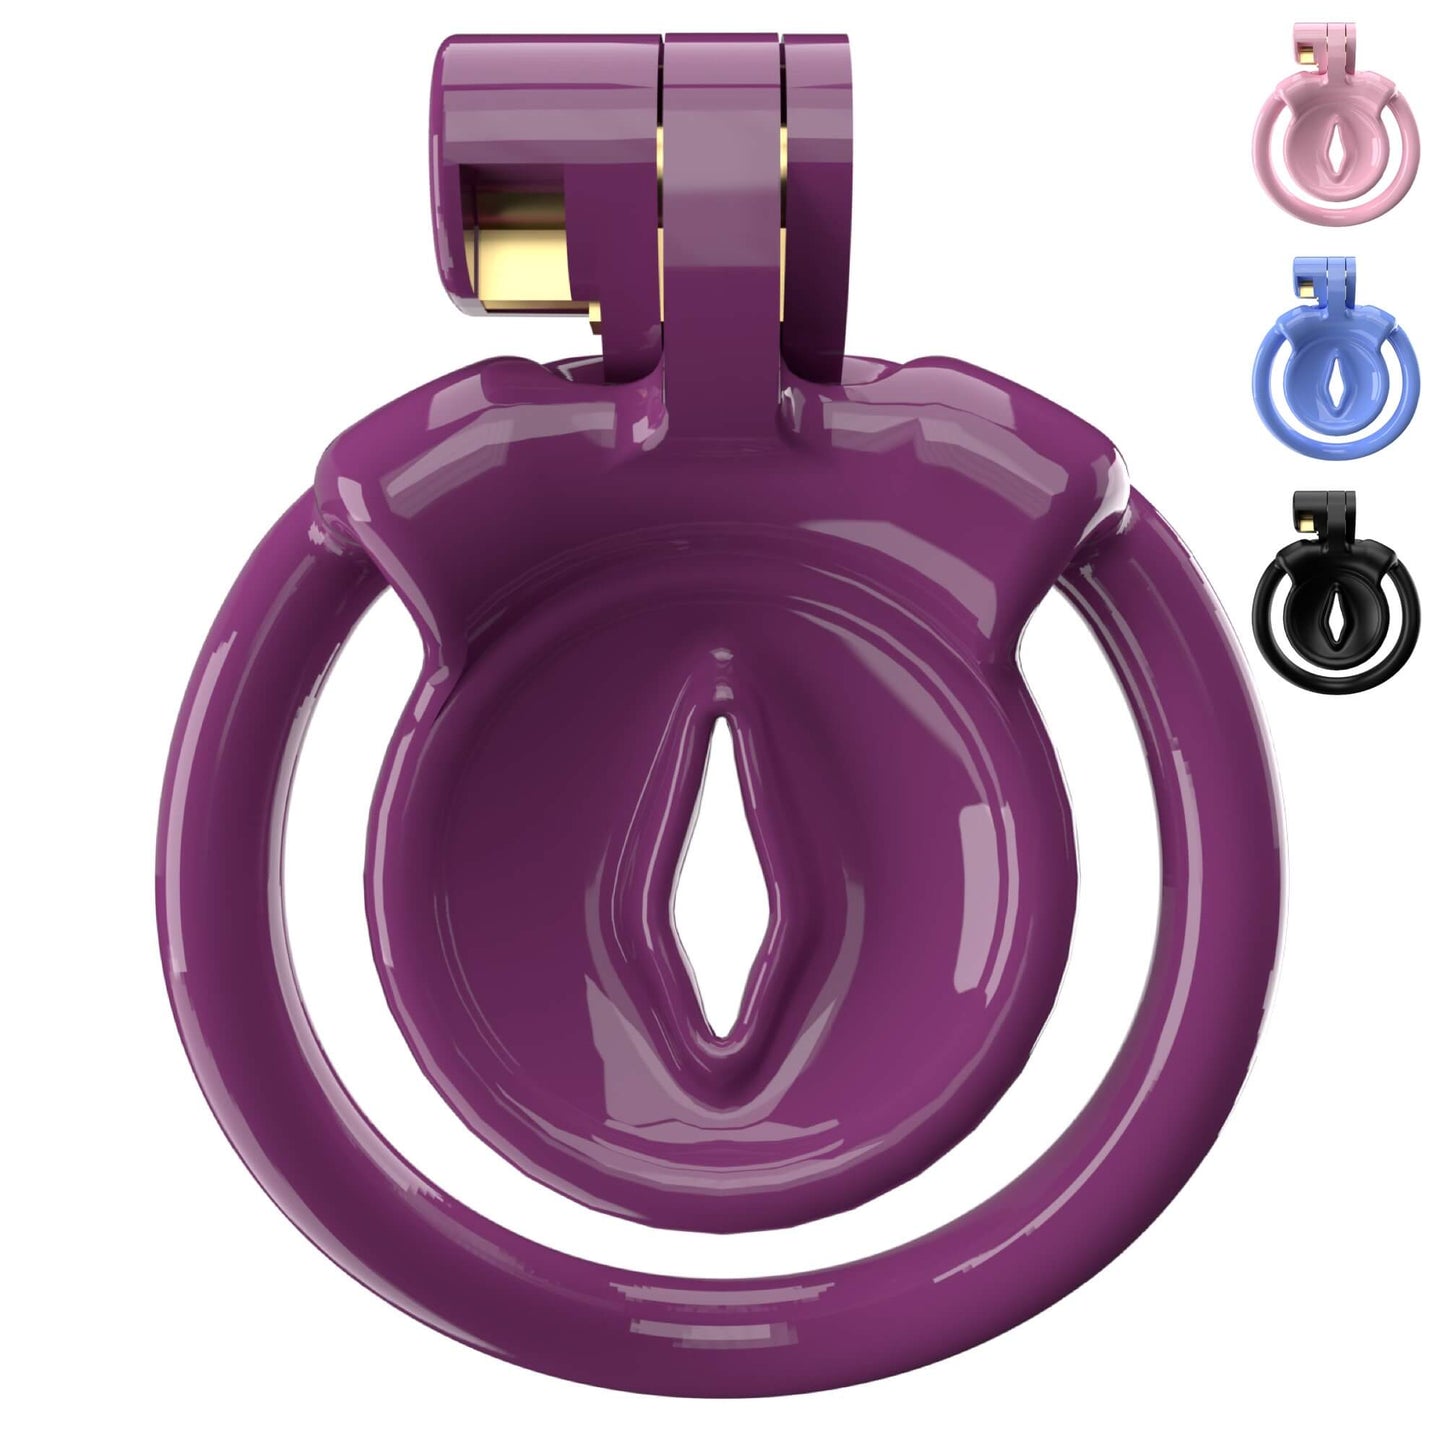 Super Small XX-1 Sissy Chastity Cage With 5 Arc Rings